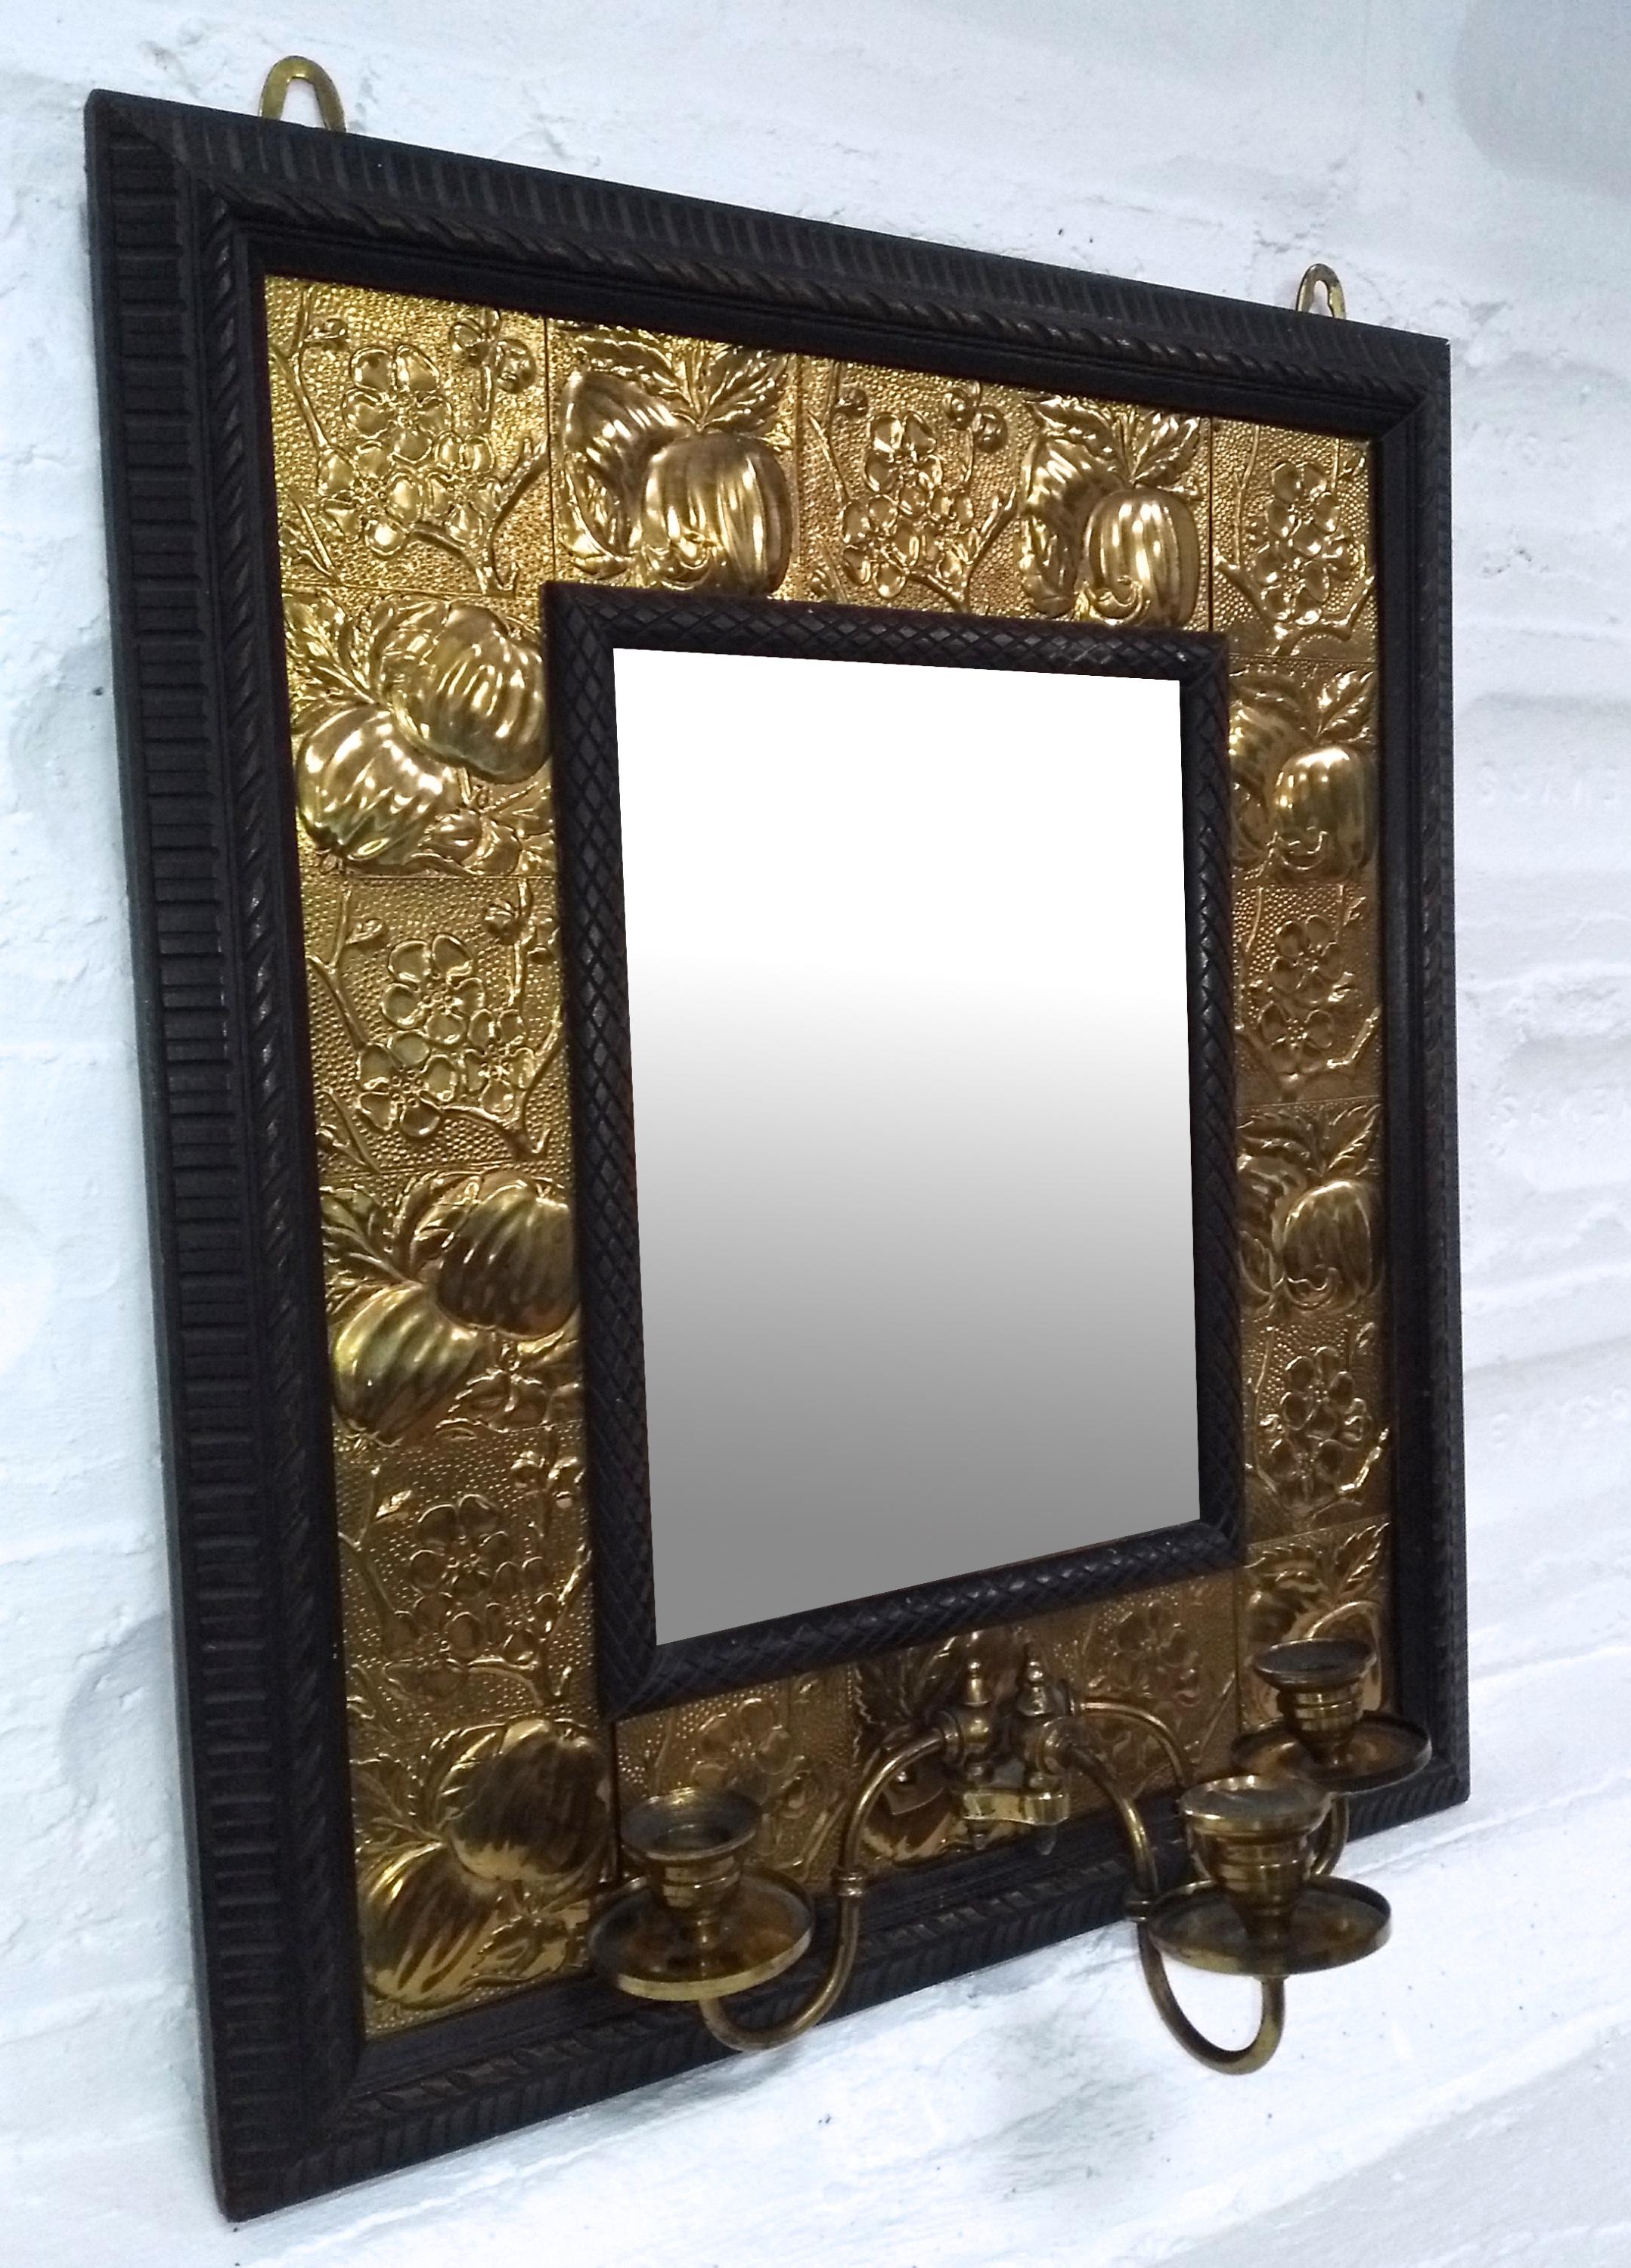 Aesthetic Movement Arts & Crafts Ebonized Mahogany & Brass Mirror, Attributed to Shapland & Petter